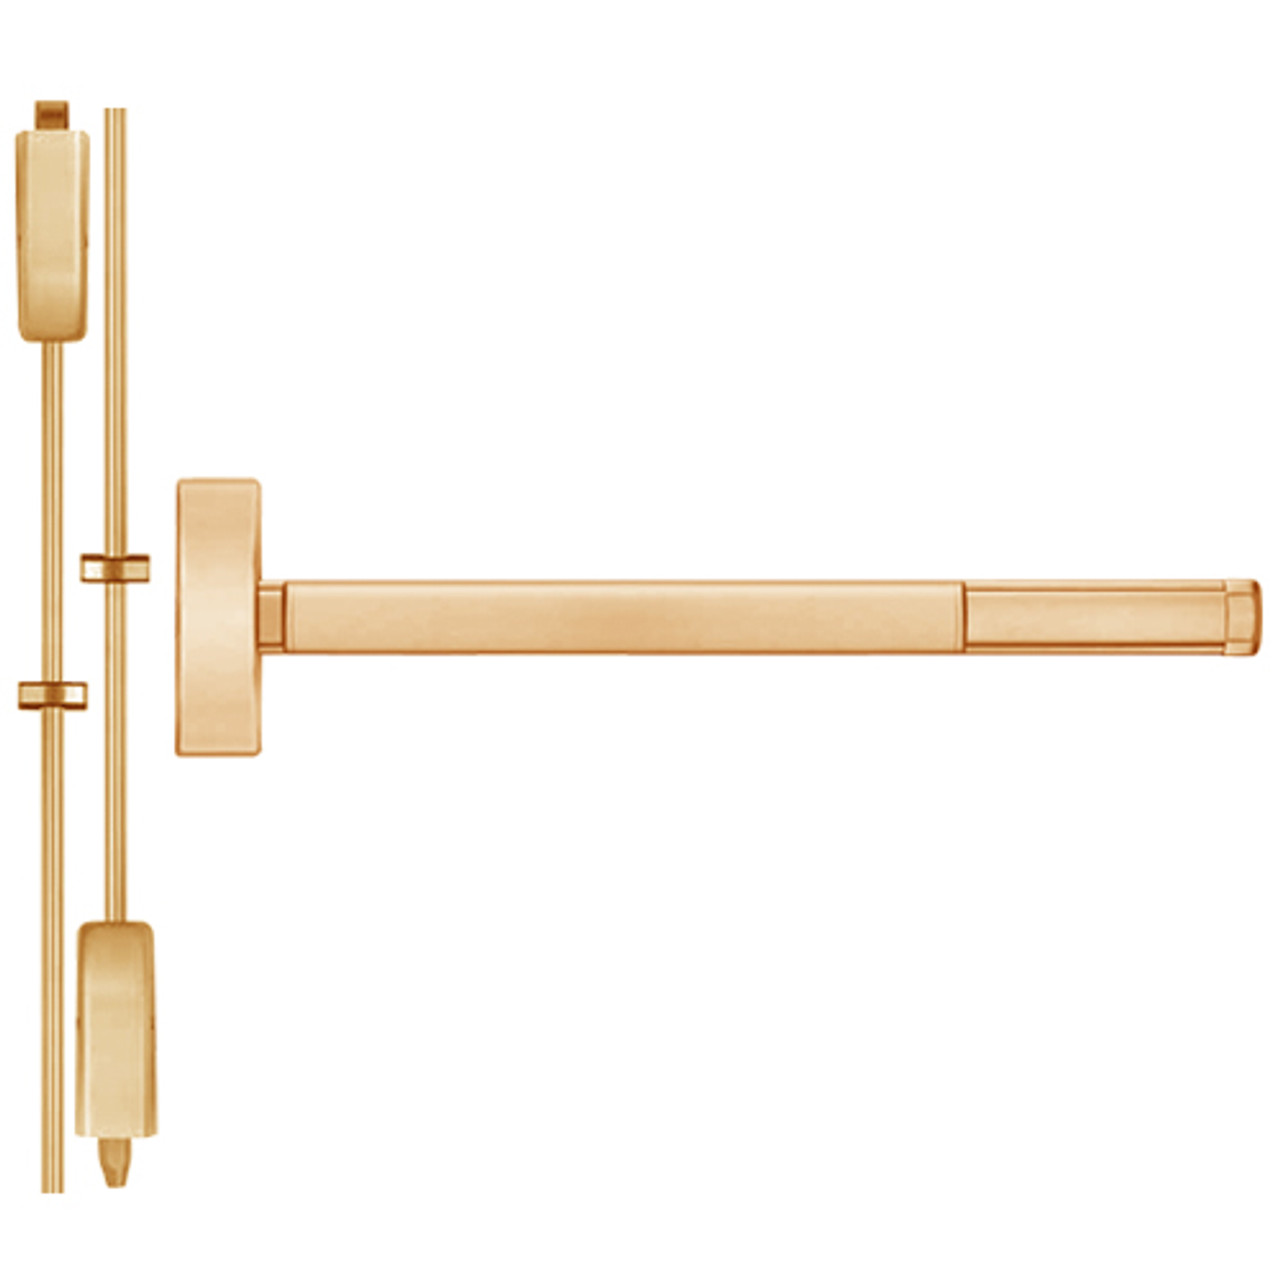 DE2205LBR-612-48 PHI 2200 Series Non Fire Rated Apex Surface Vertical Rod Device with Delayed Egress Prepped for Key Controls Thumb Piece in Satin Bronze Finish